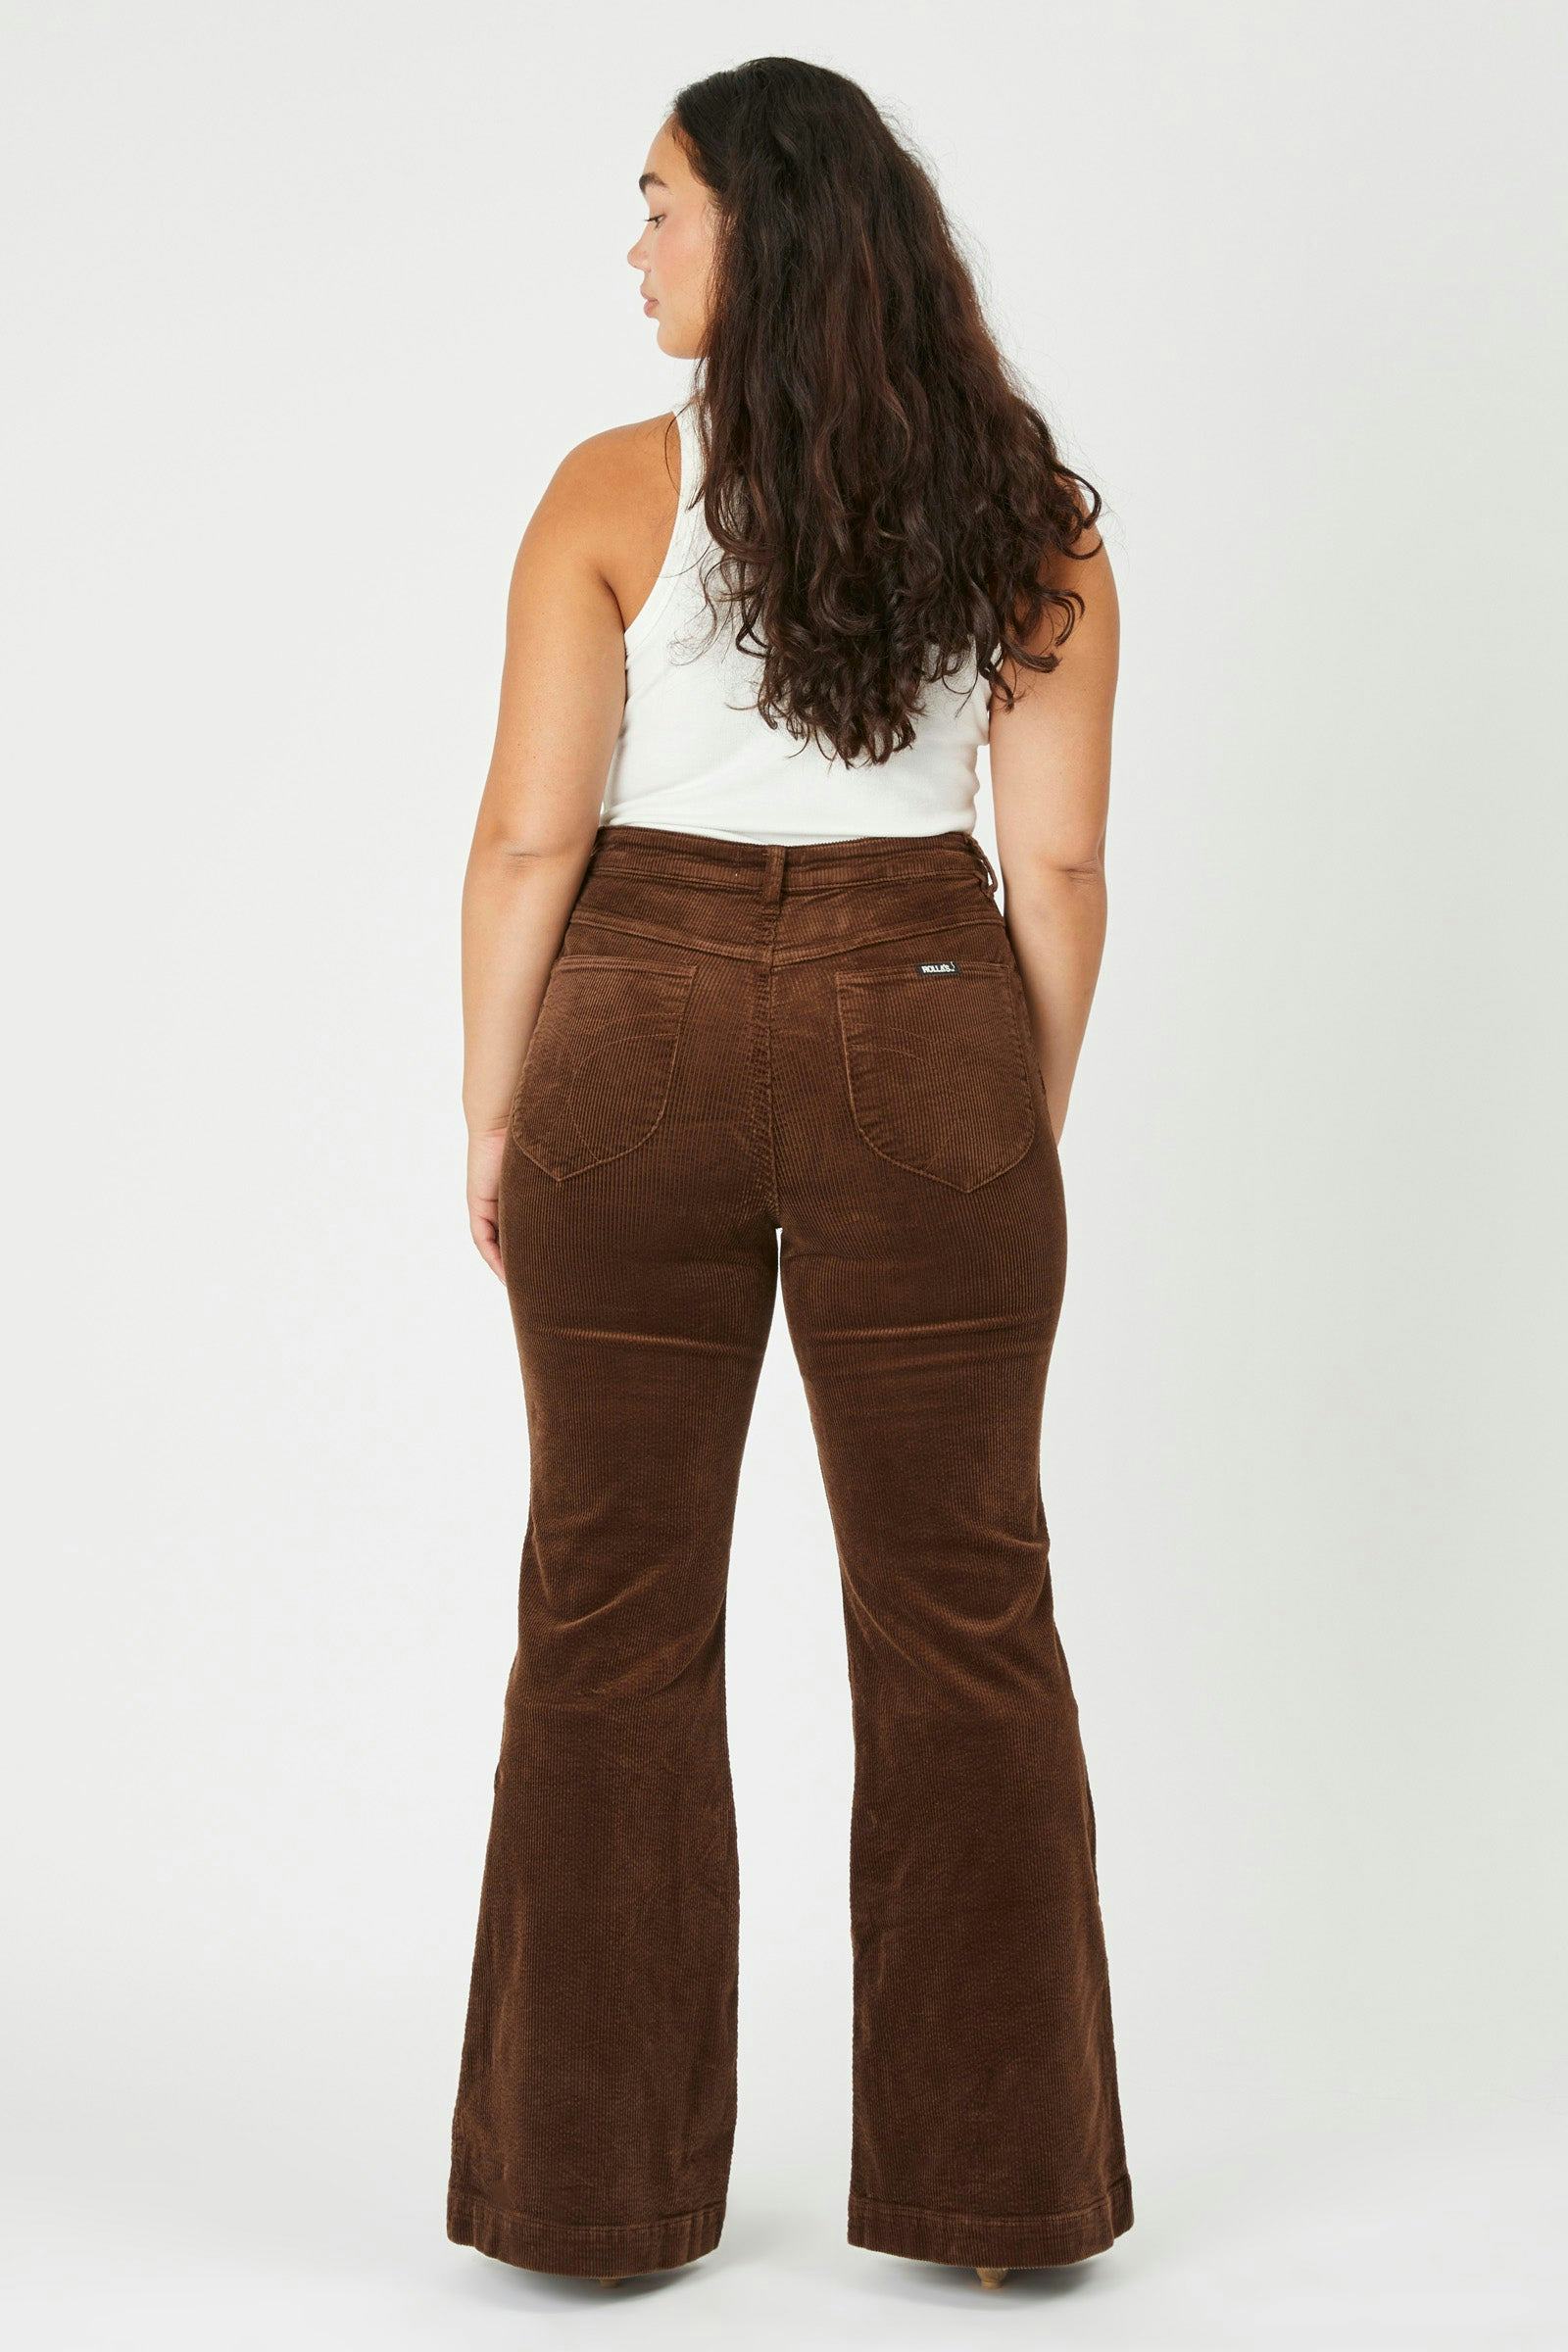 Rolla's Women's East Coast High Rise Corduroy Flare Pants - Country  Outfitter